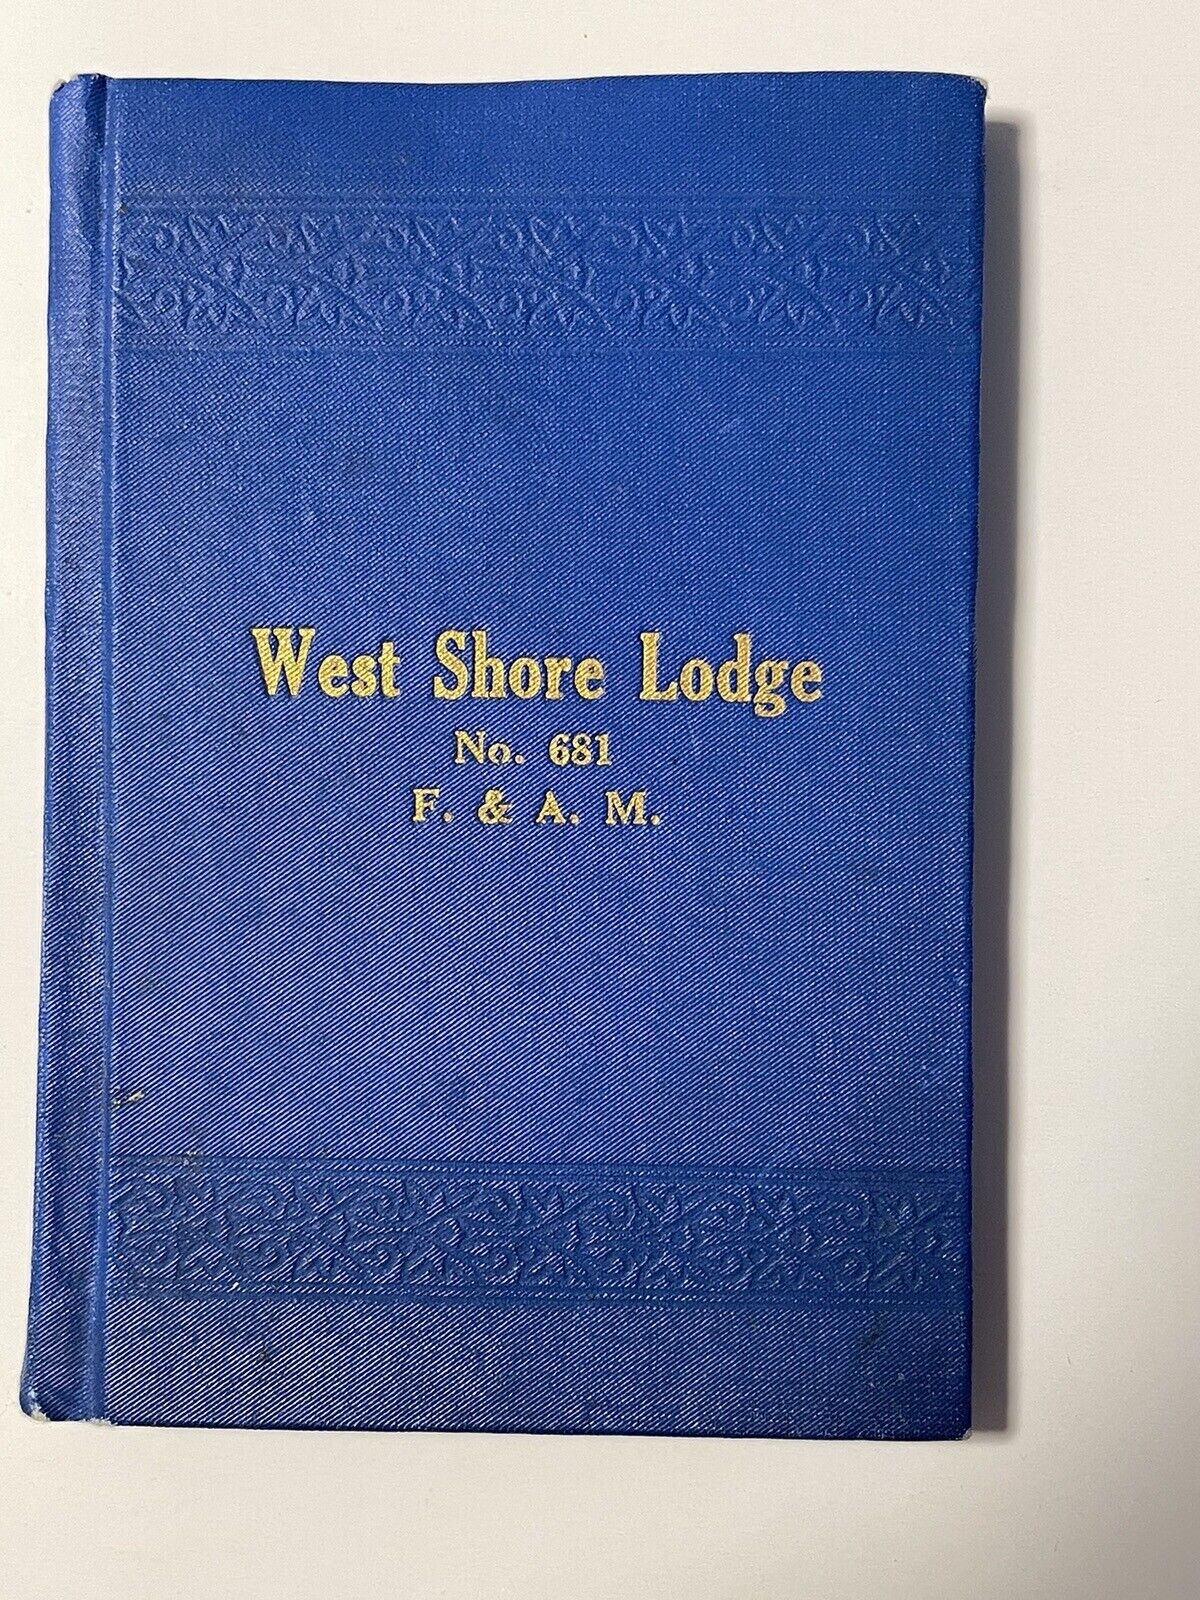 1916 Pennsylvania Masons By-laws Good Hardcover  West Shore Lodge